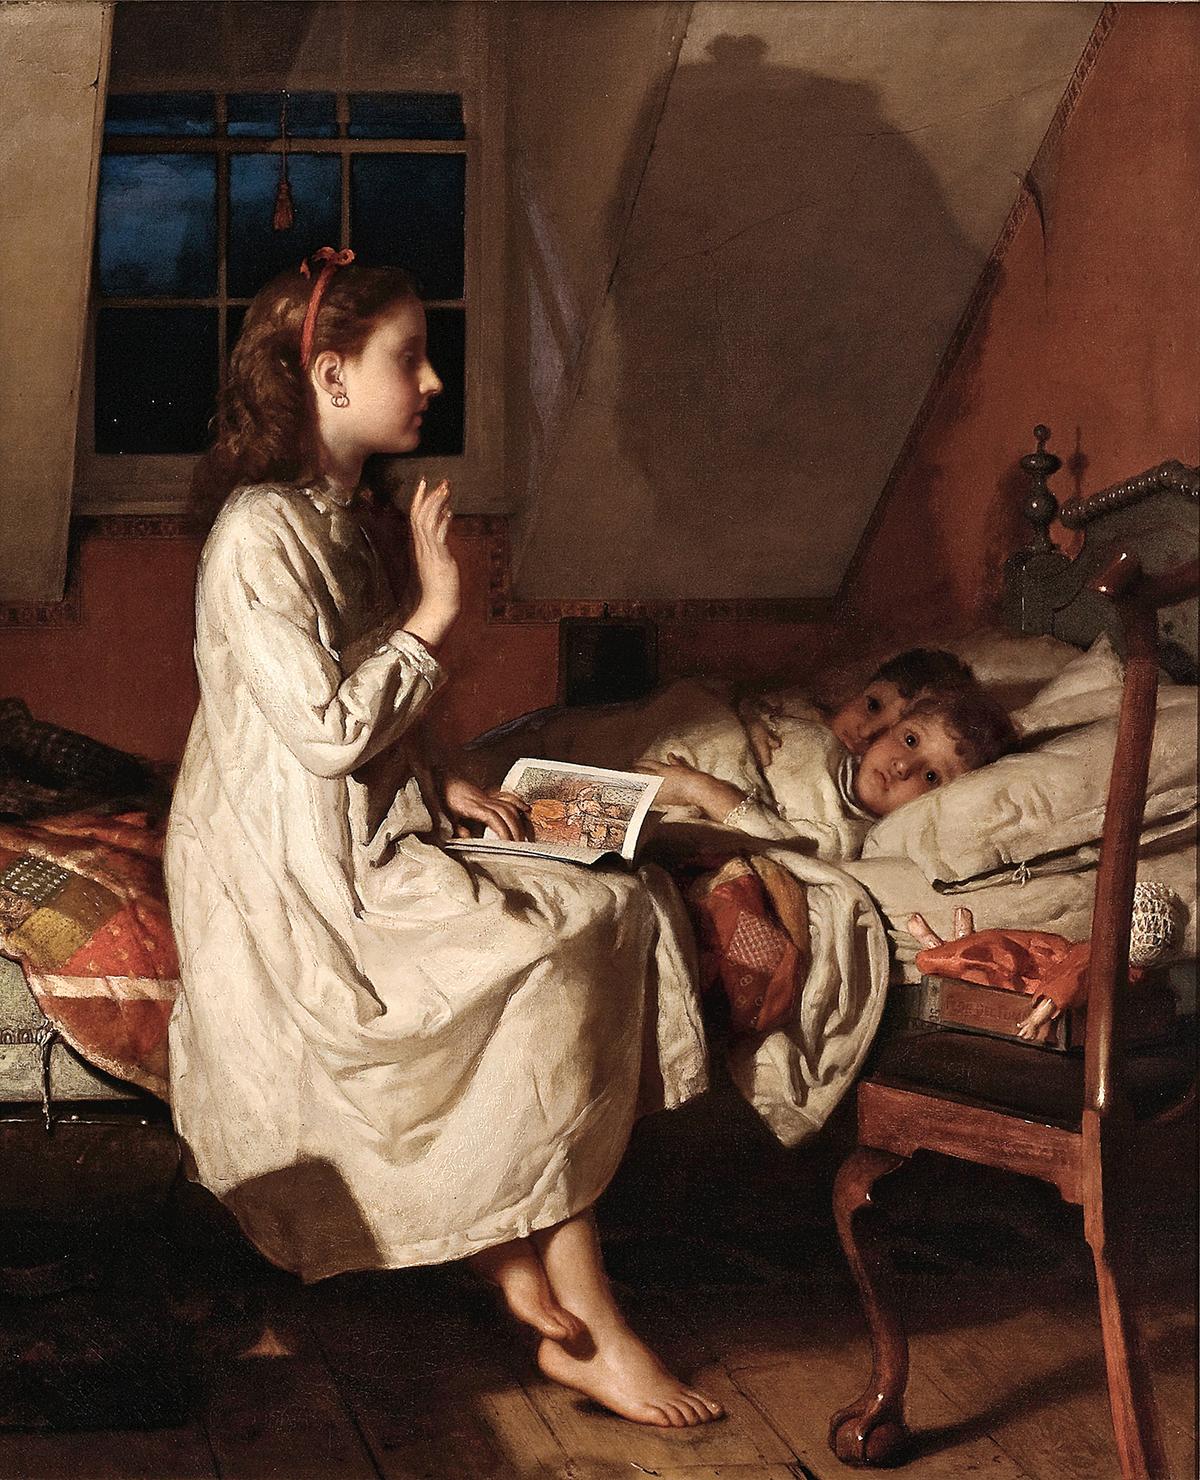 In the past, there were often more than one to a bed. "Story of Golden Locks," circa 1870, by Seymour Joseph Guy. Oil on canvas. The Metropolitan Museum of Art, New York. (Public Domain).